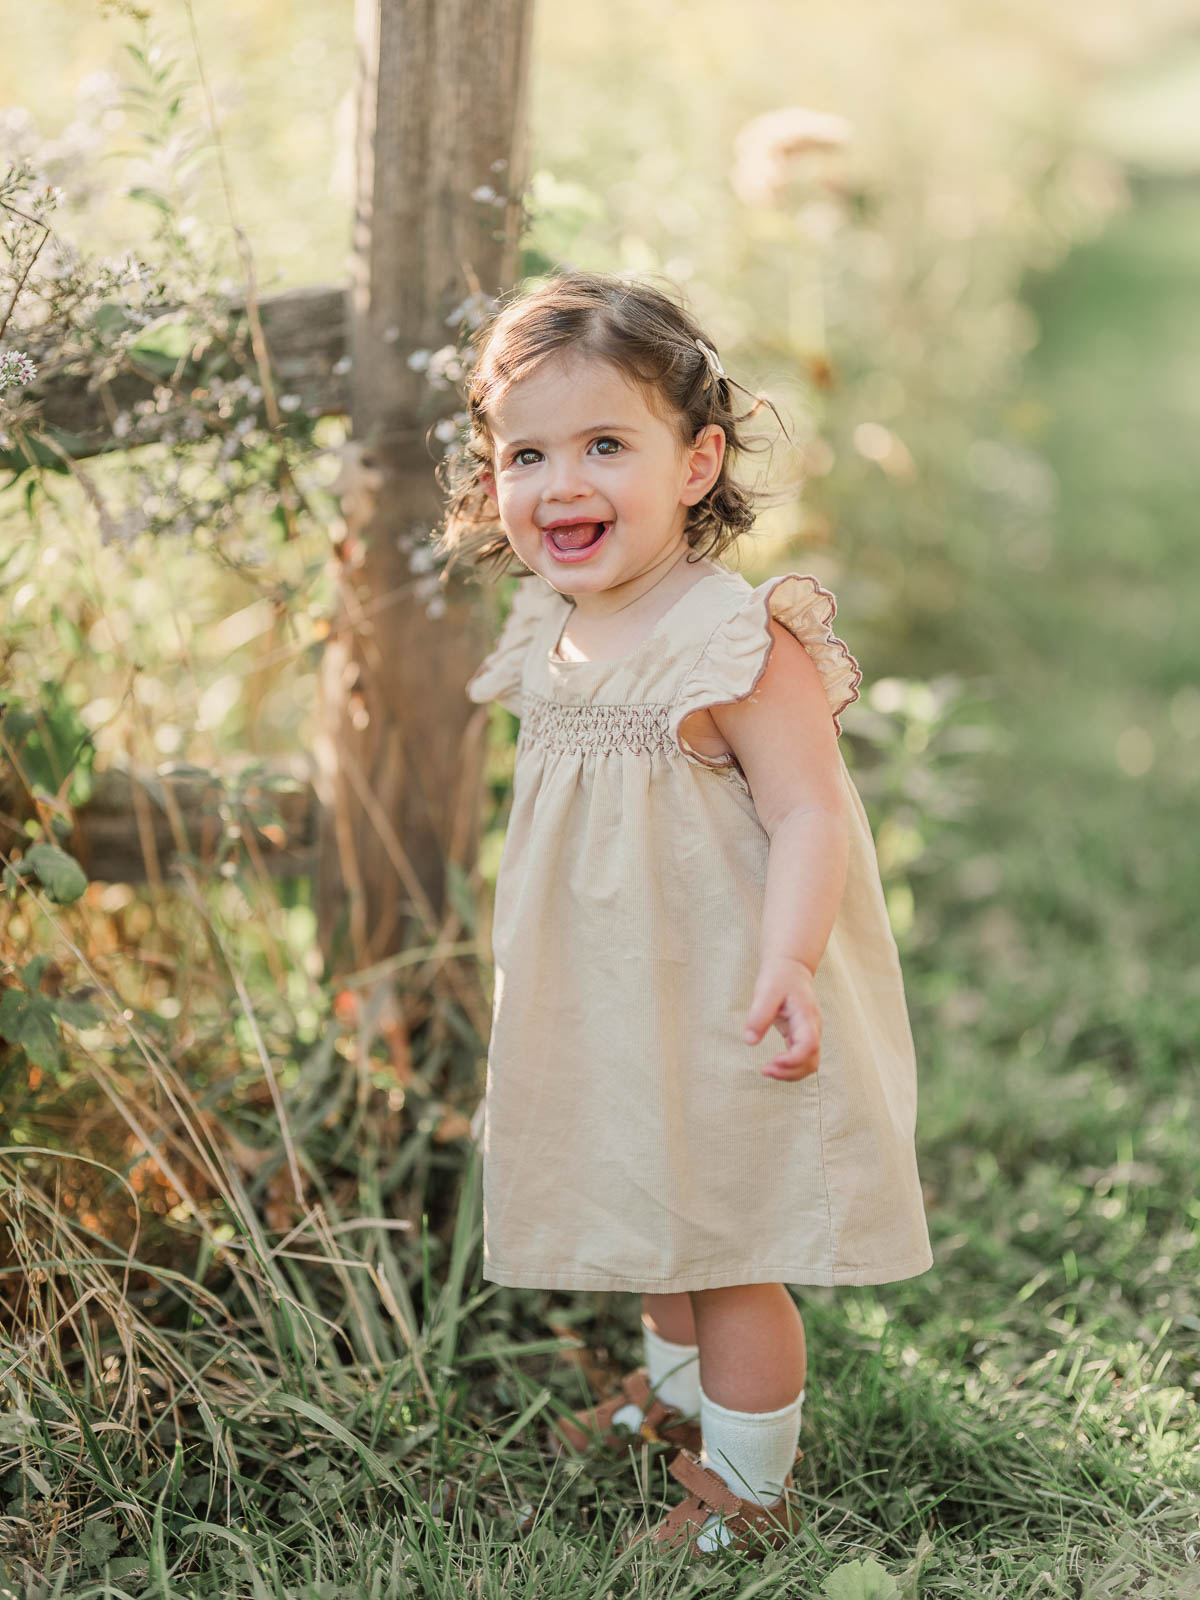 Childrens Photography Sample Gallery - Child Portraits